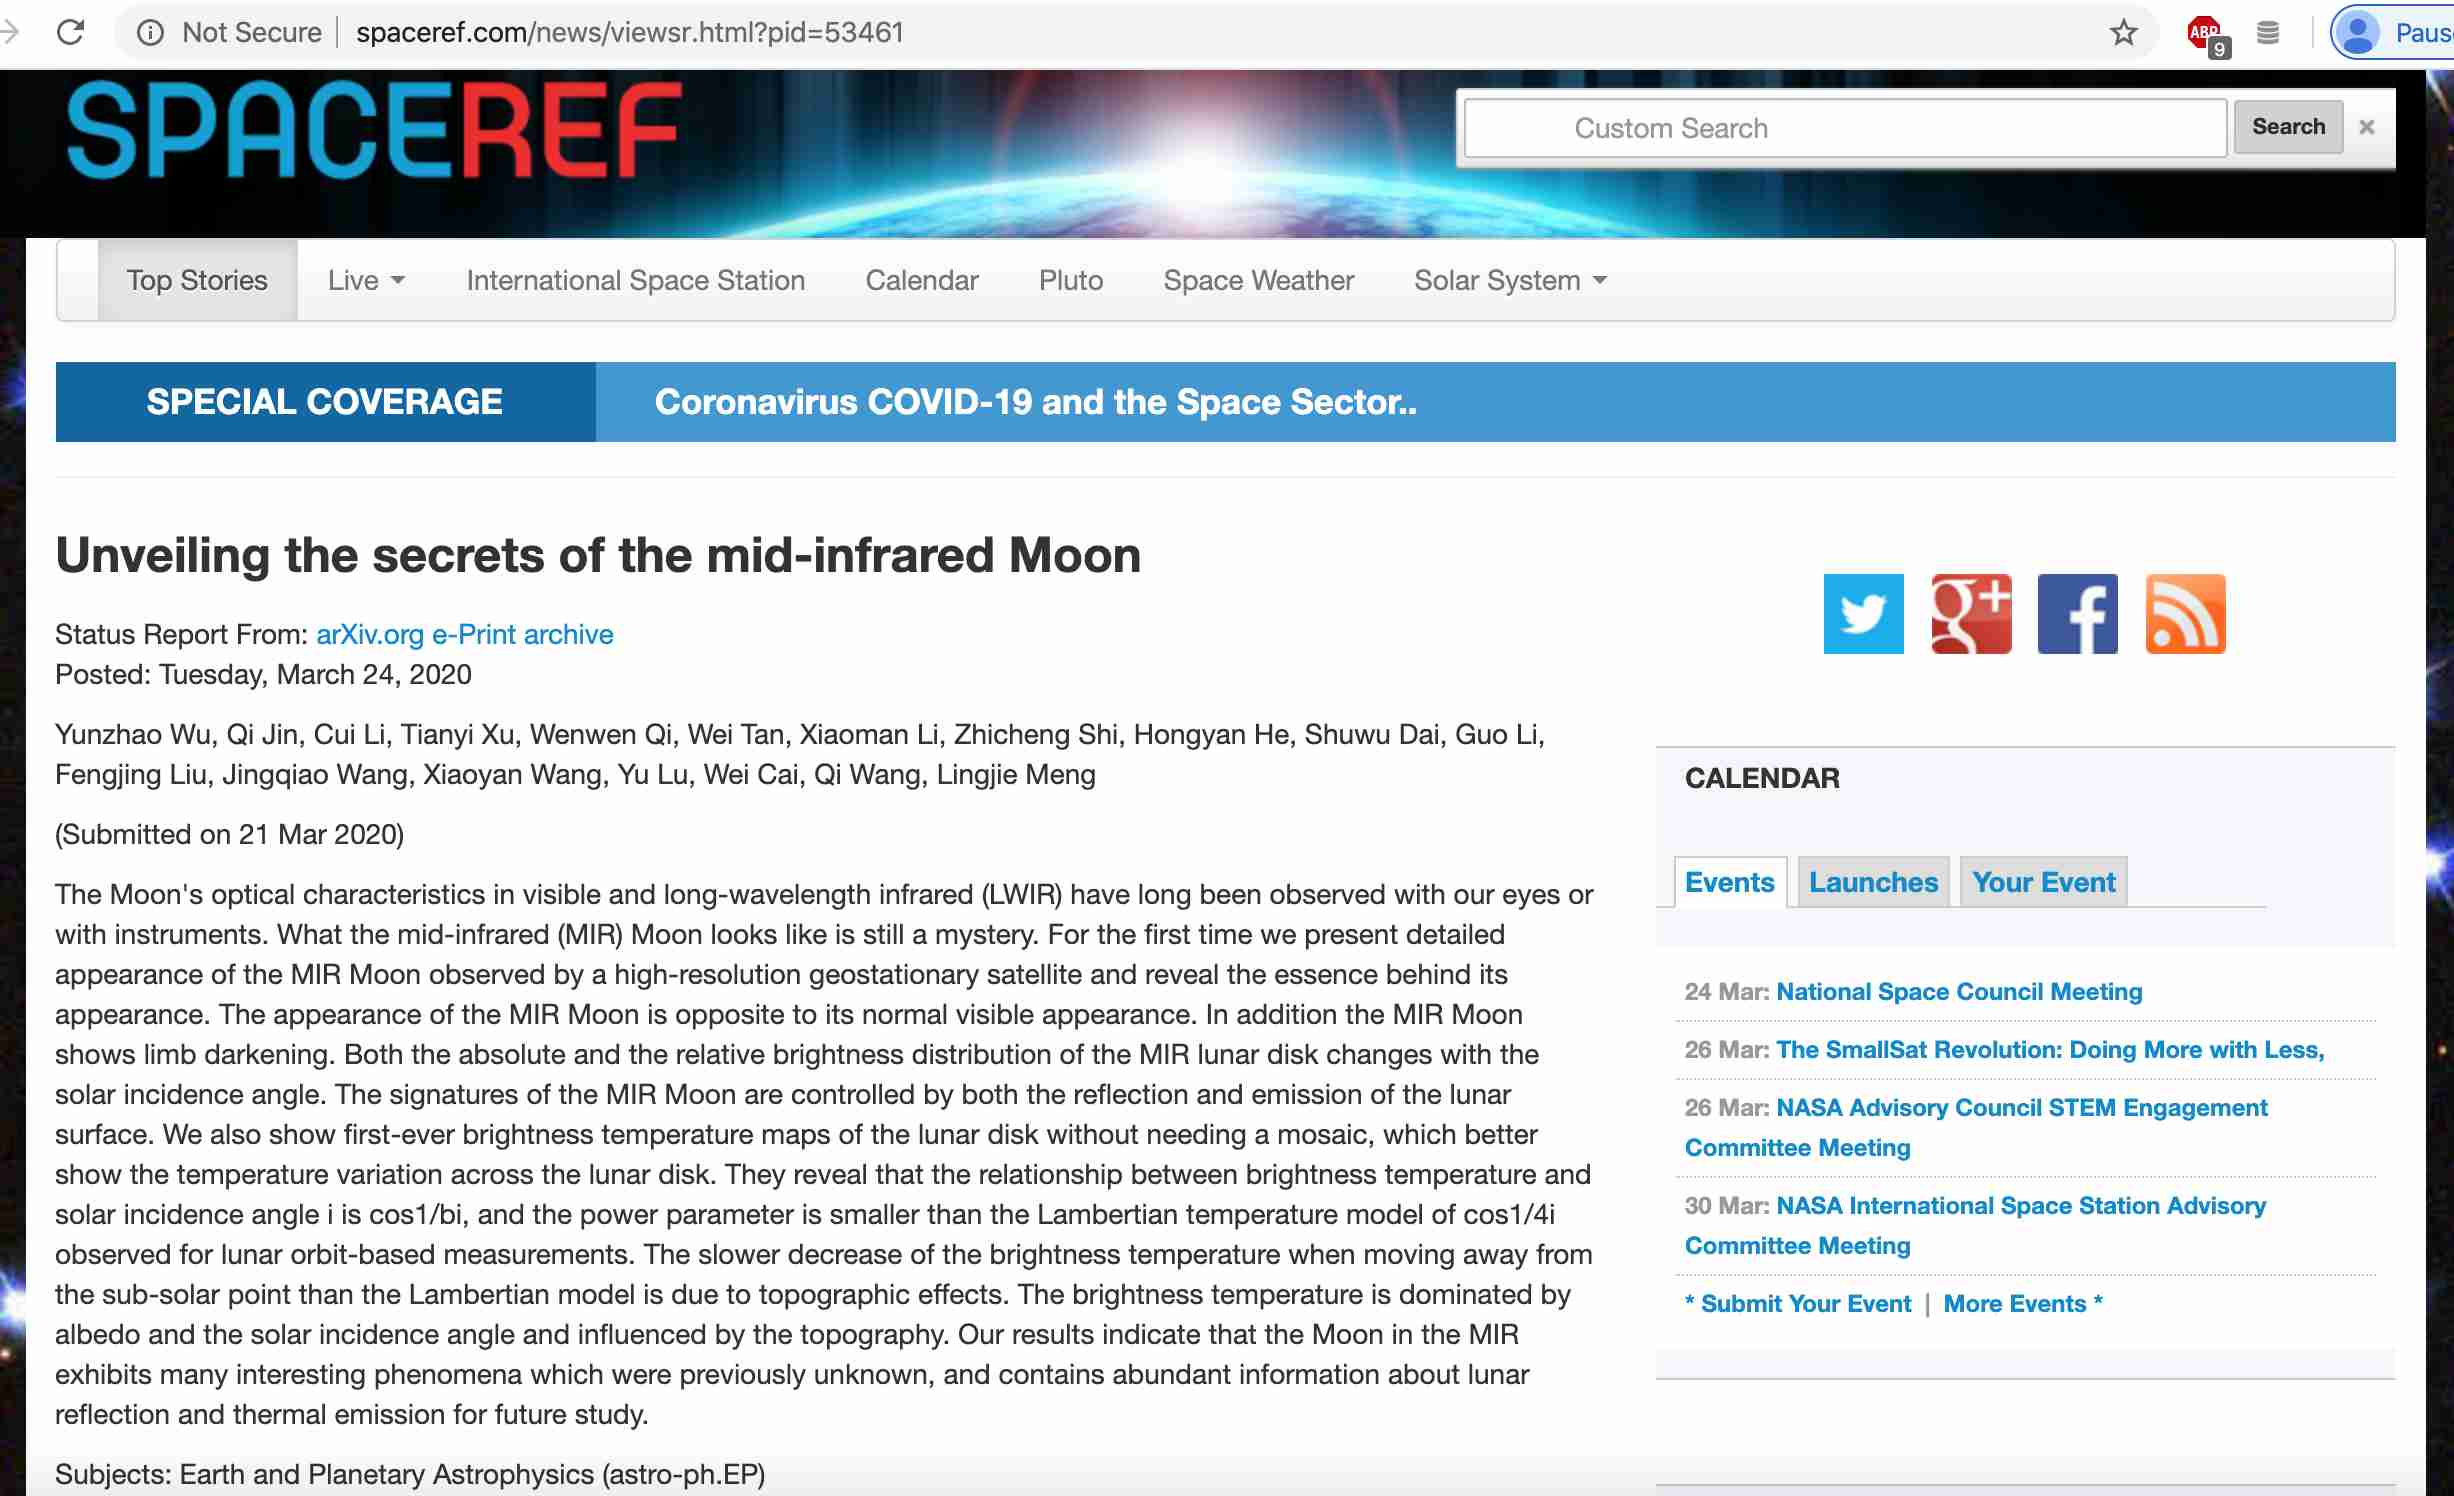 Unveiling the secrets of the mid-infrared Moon - 1.jpg